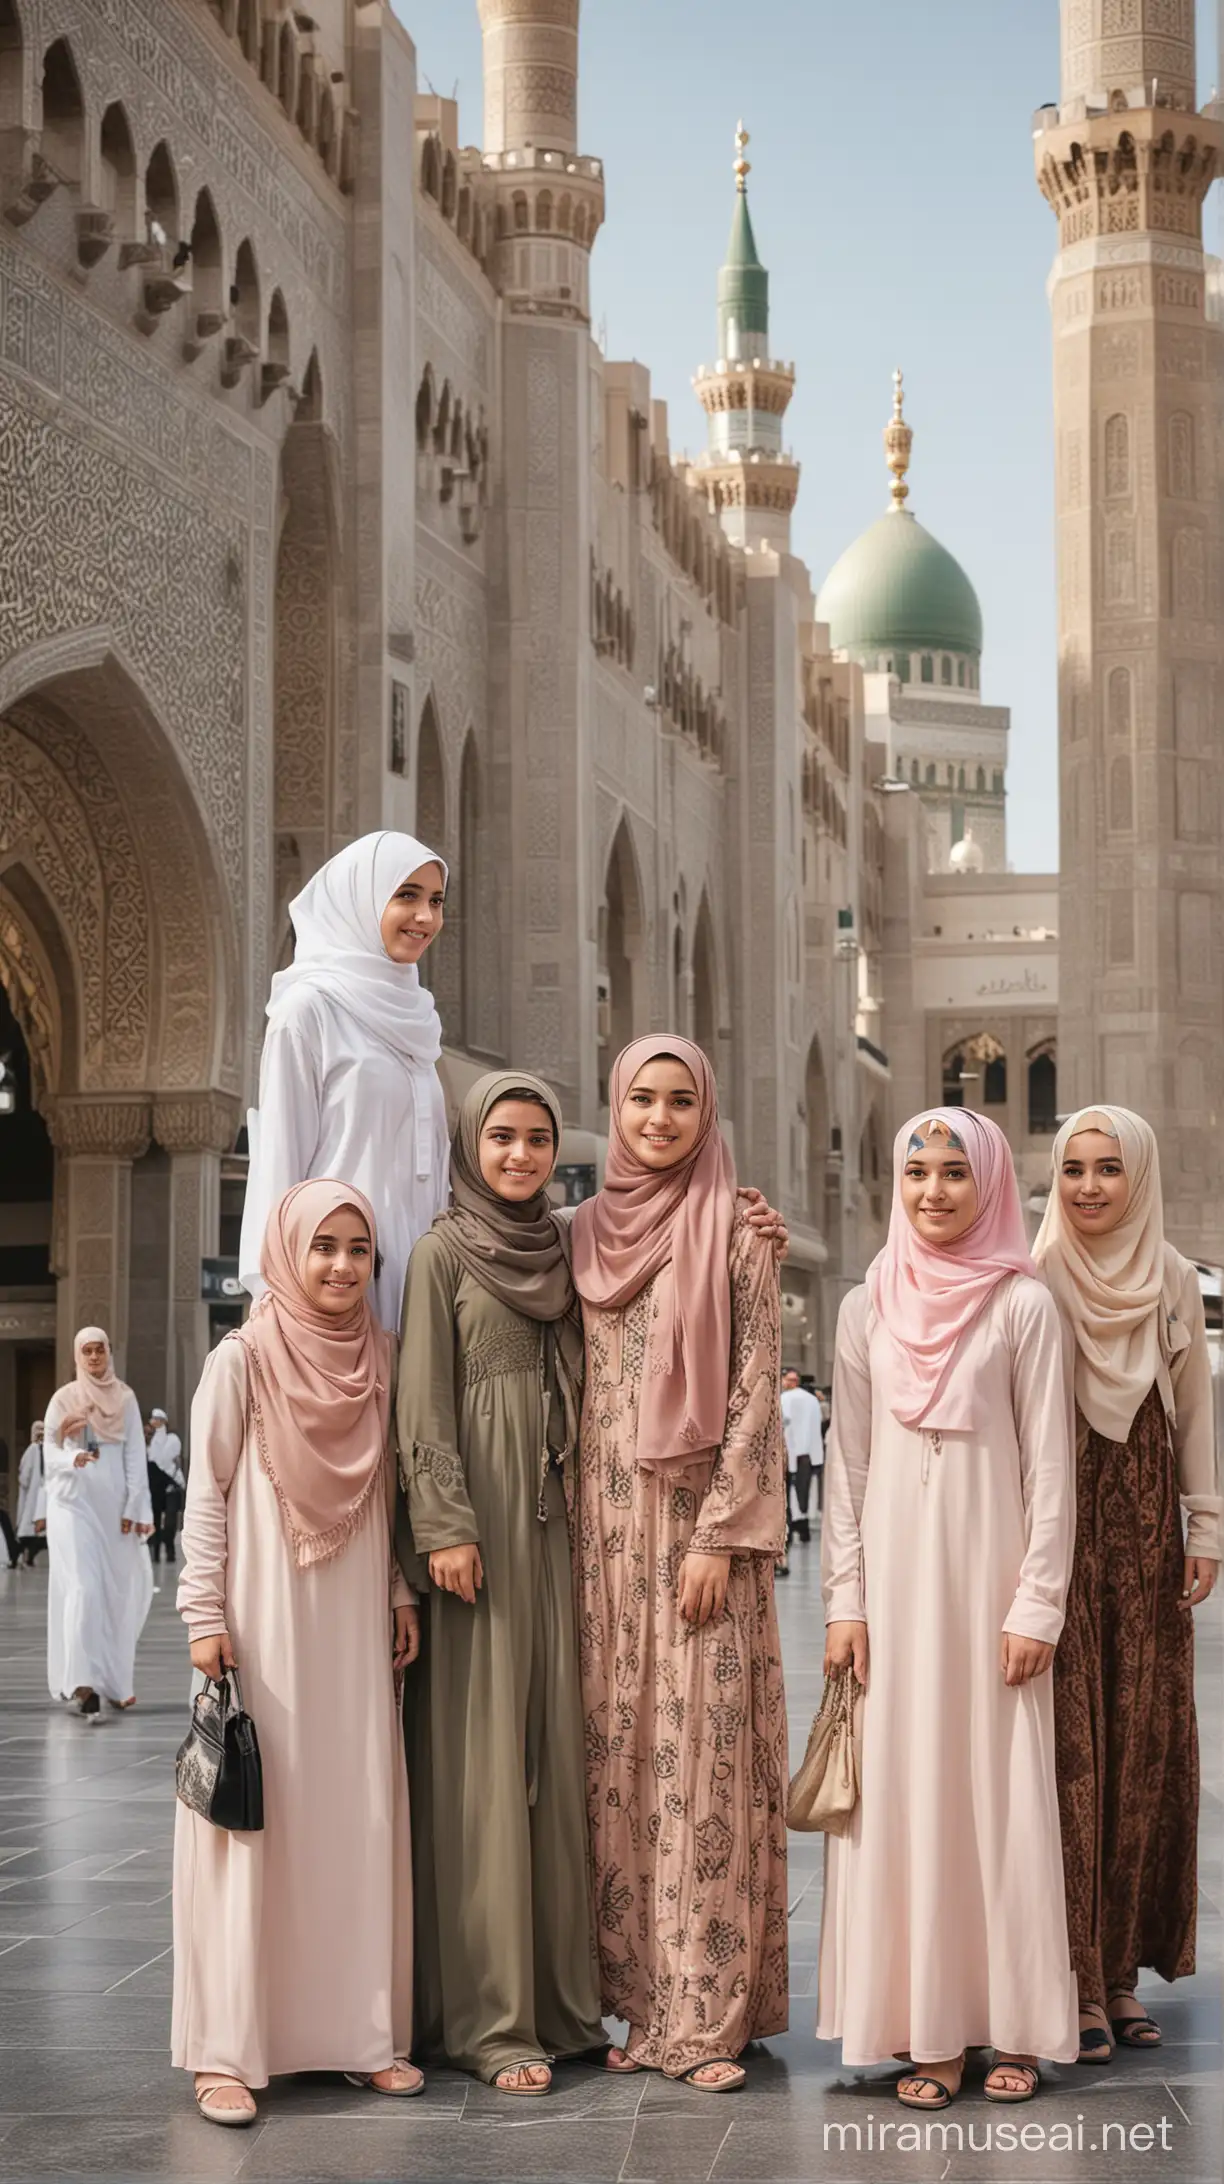 Muslim Group of Women and Man in Traditional Attire at Masjid alHaram Mecca